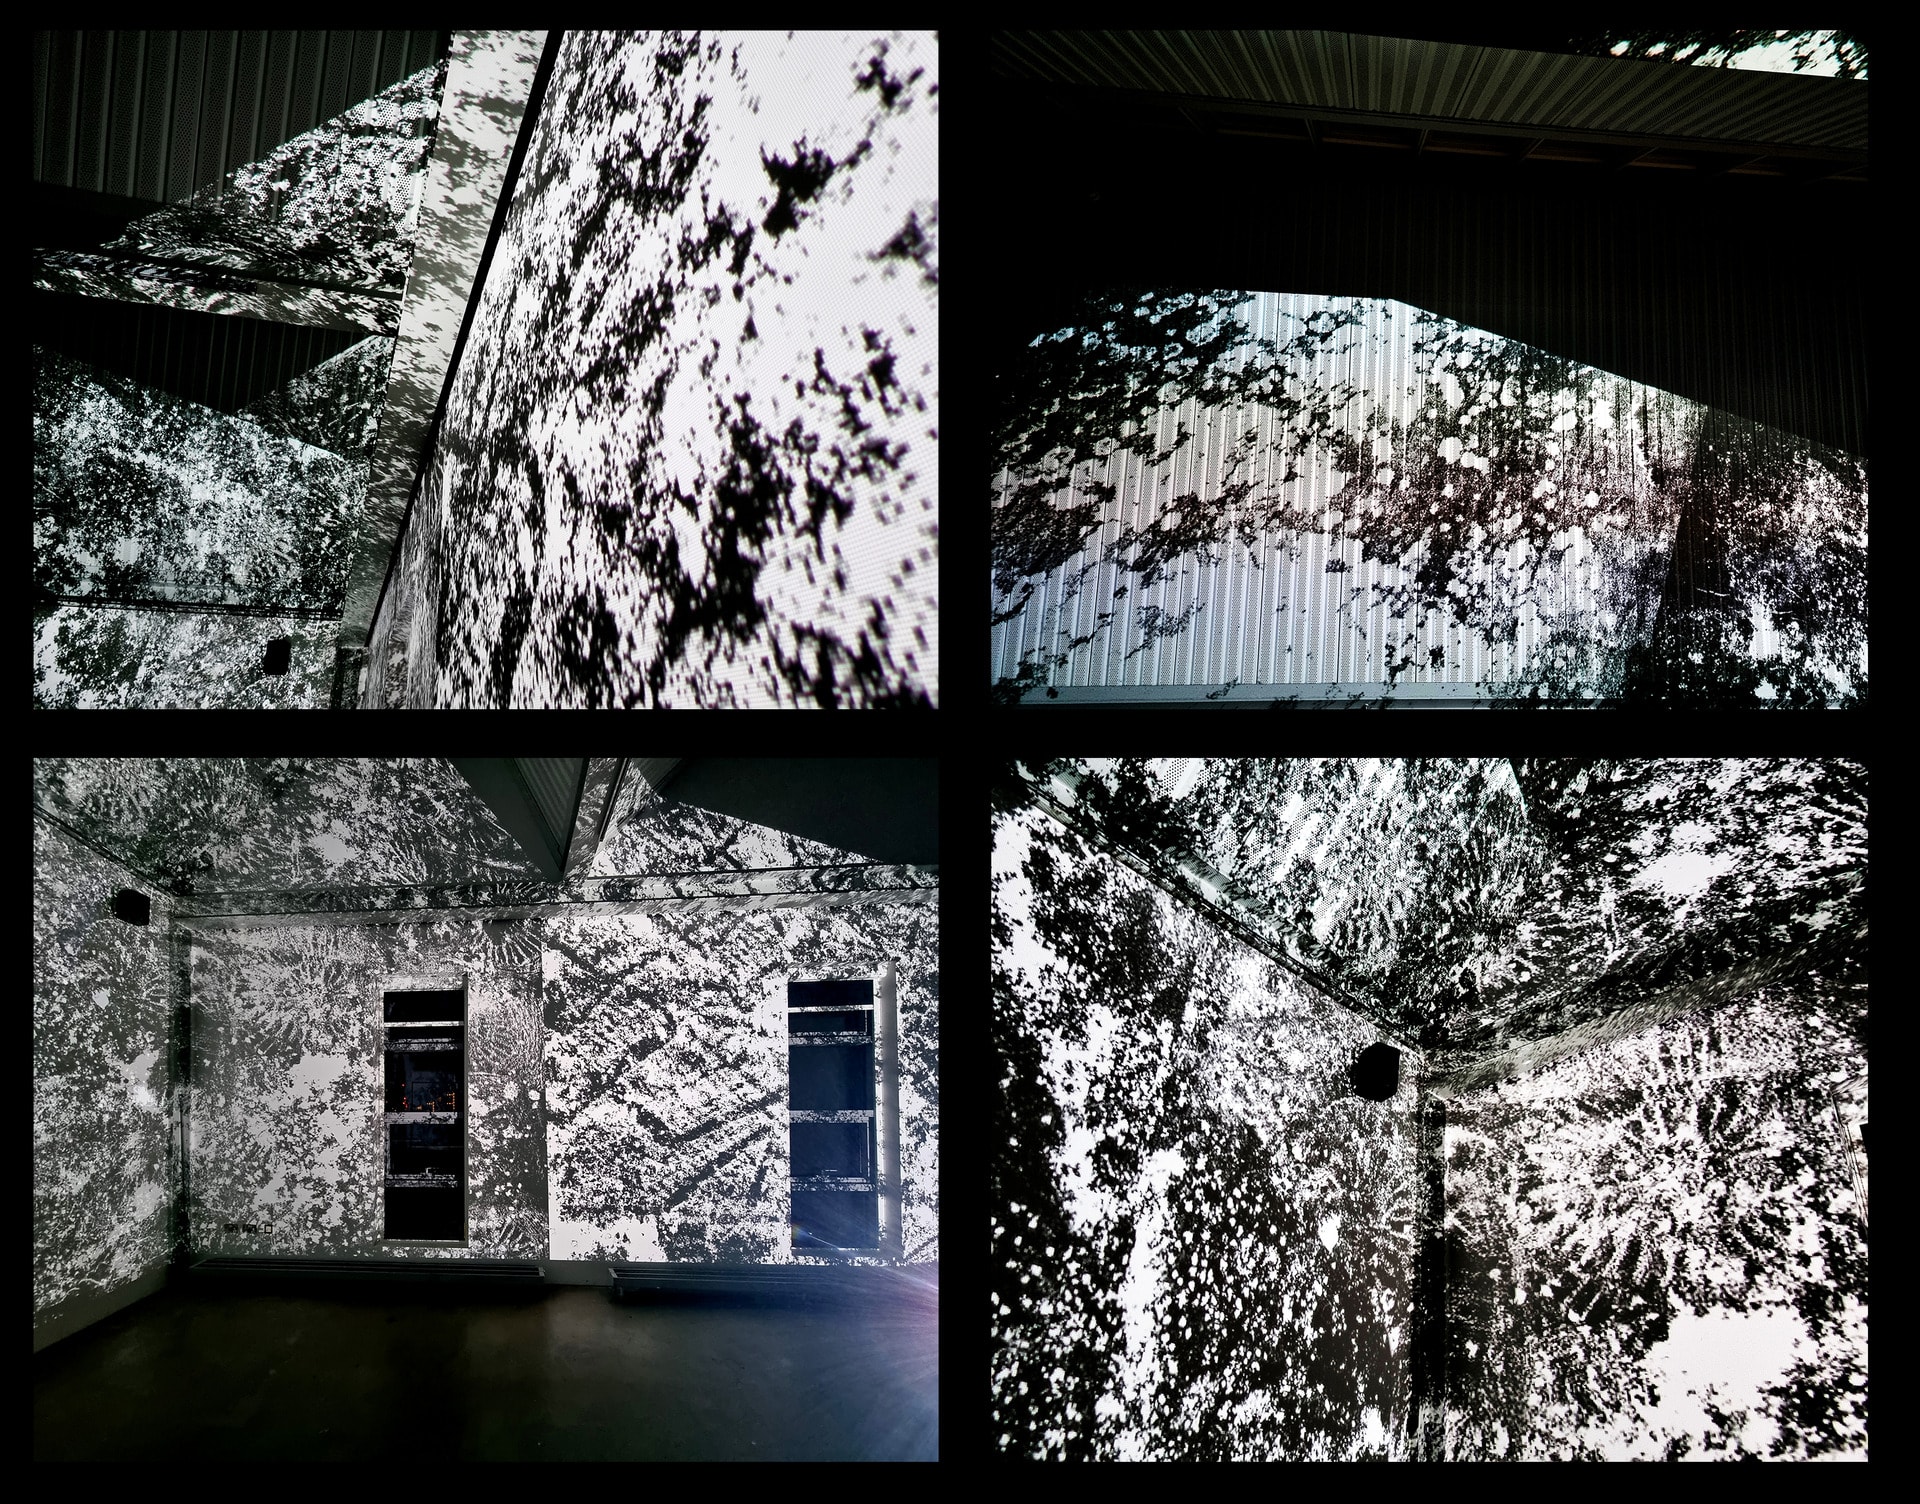 set of four black and white images showing a room covered with black and white abstract projections